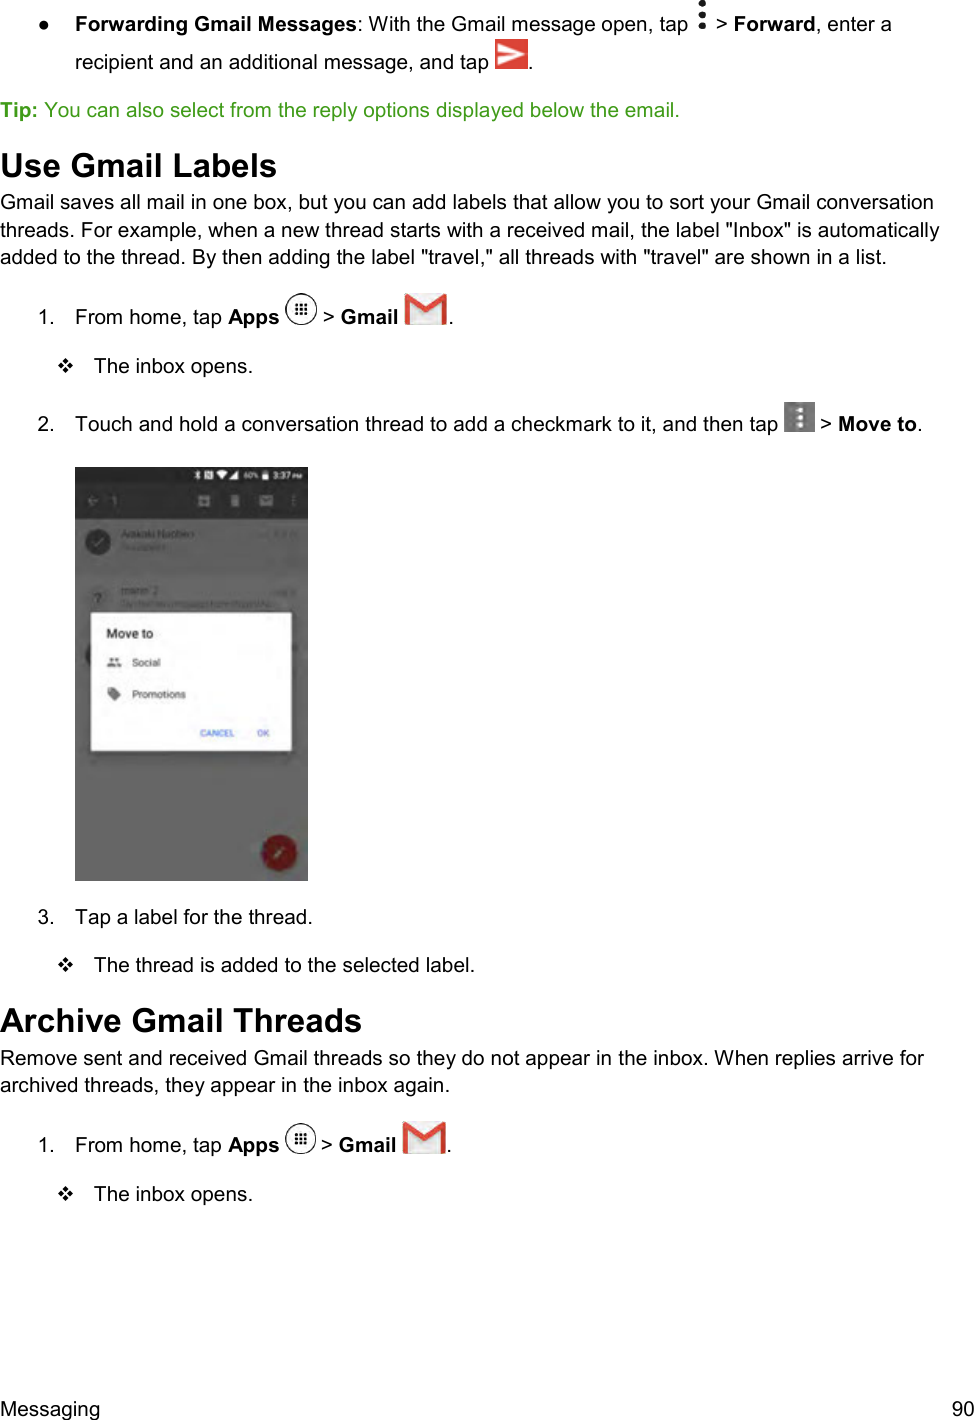  Messaging  90 ●  Forwarding Gmail Messages: With the Gmail message open, tap   &gt; Forward, enter a recipient and an additional message, and tap  . Tip: You can also select from the reply options displayed below the email. Use Gmail Labels Gmail saves all mail in one box, but you can add labels that allow you to sort your Gmail conversation threads. For example, when a new thread starts with a received mail, the label &quot;Inbox&quot; is automatically added to the thread. By then adding the label &quot;travel,&quot; all threads with &quot;travel&quot; are shown in a list. 1.  From home, tap Apps   &gt; Gmail  .    The inbox opens. 2.  Touch and hold a conversation thread to add a checkmark to it, and then tap   &gt; Move to.    3.  Tap a label for the thread.   The thread is added to the selected label. Archive Gmail Threads Remove sent and received Gmail threads so they do not appear in the inbox. When replies arrive for archived threads, they appear in the inbox again. 1.  From home, tap Apps   &gt; Gmail  .    The inbox opens. 